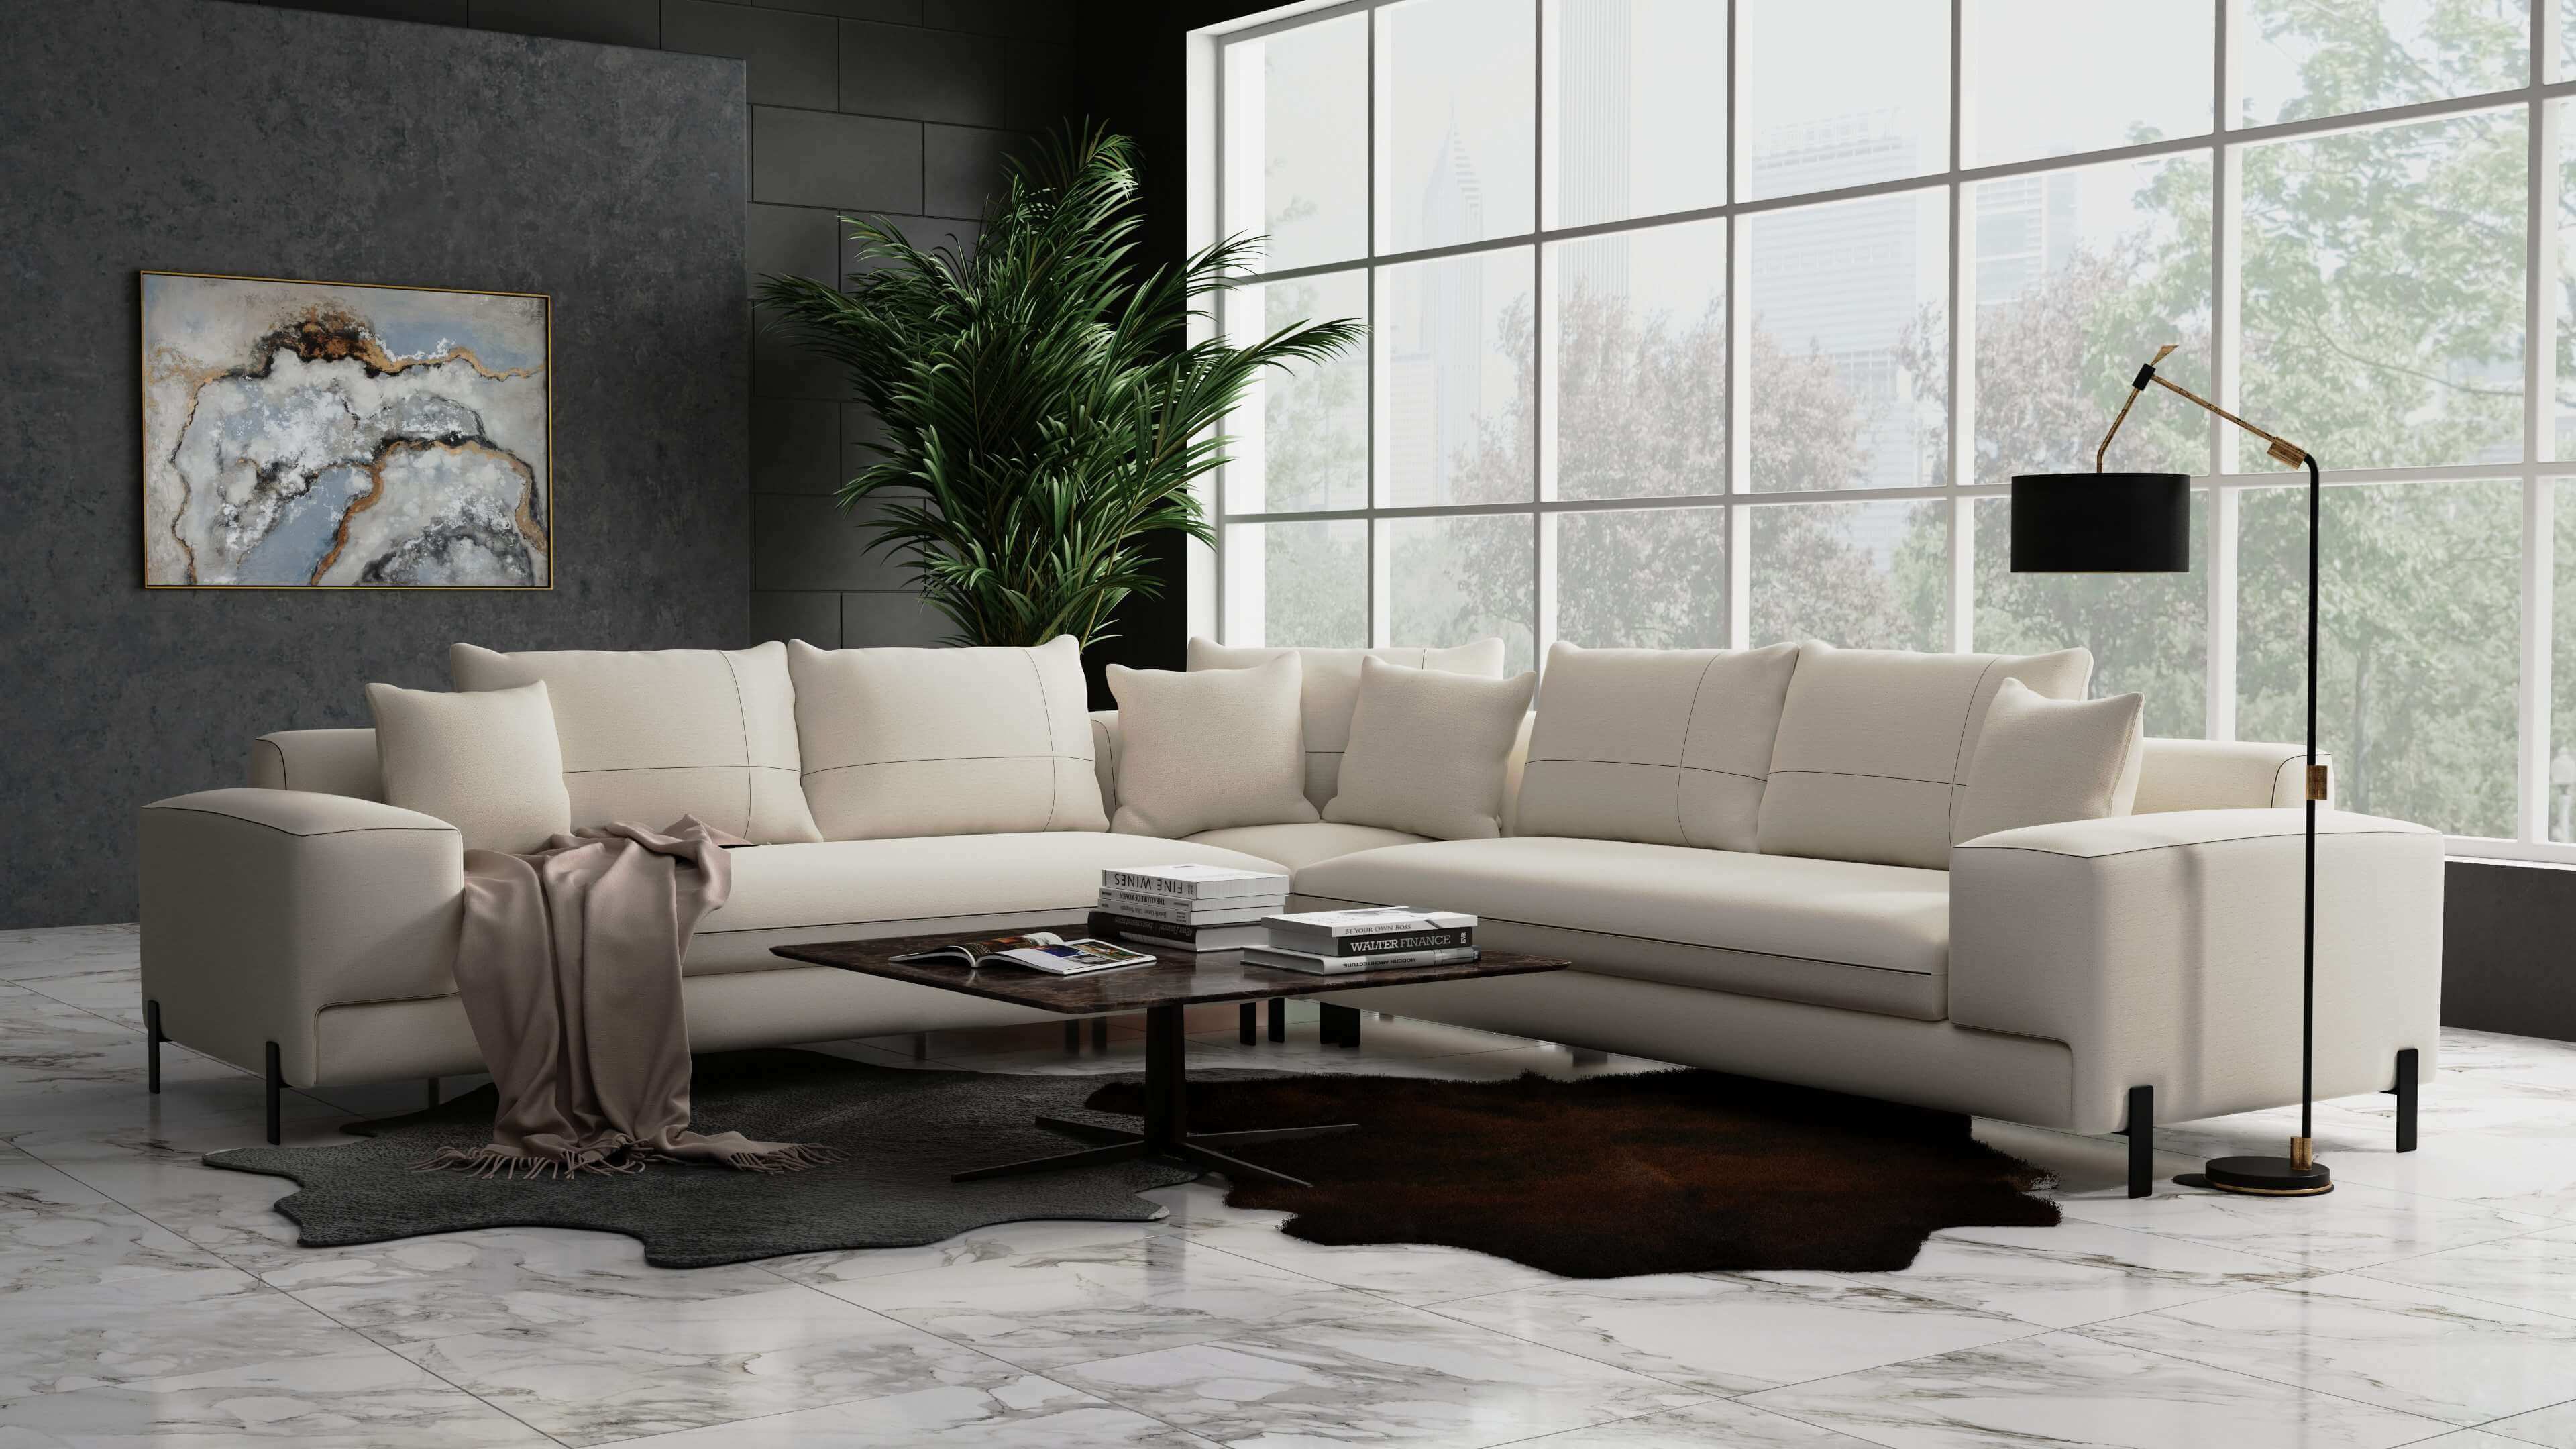 Mobital 3D generated sectional in modern lifestyle template created with imagine.io